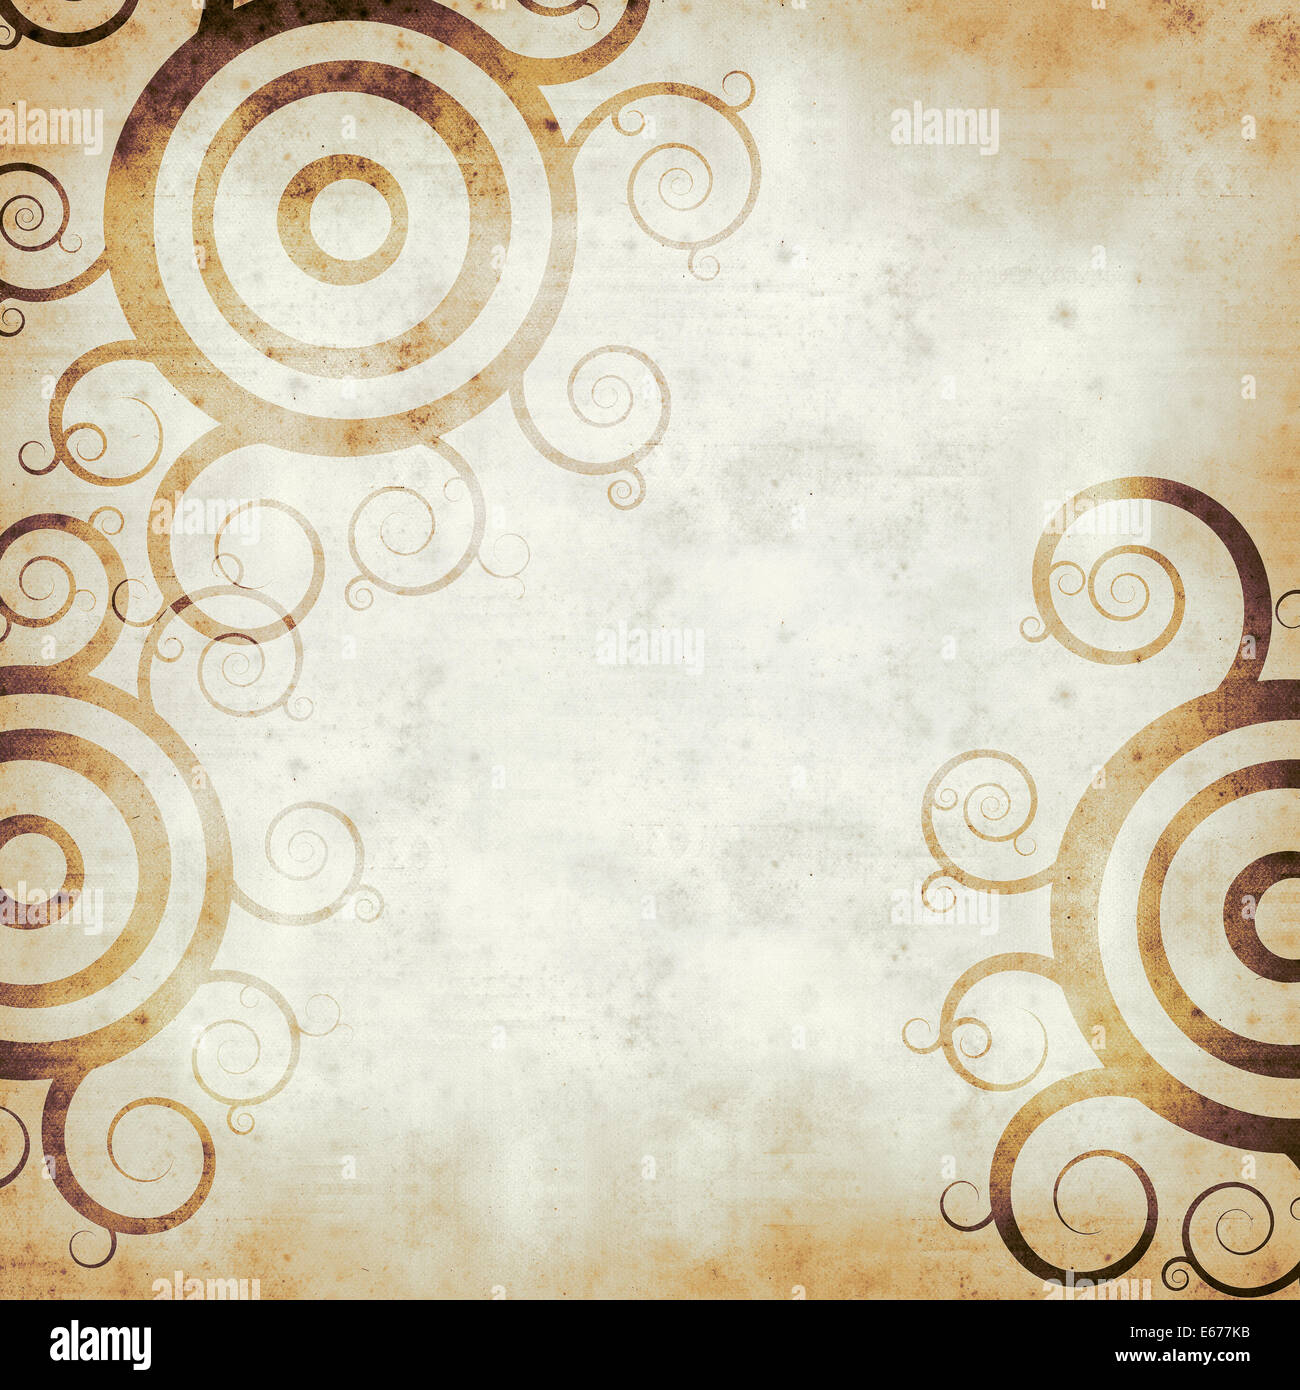 Textured Old Paper Background With Funky Design Stock Photo